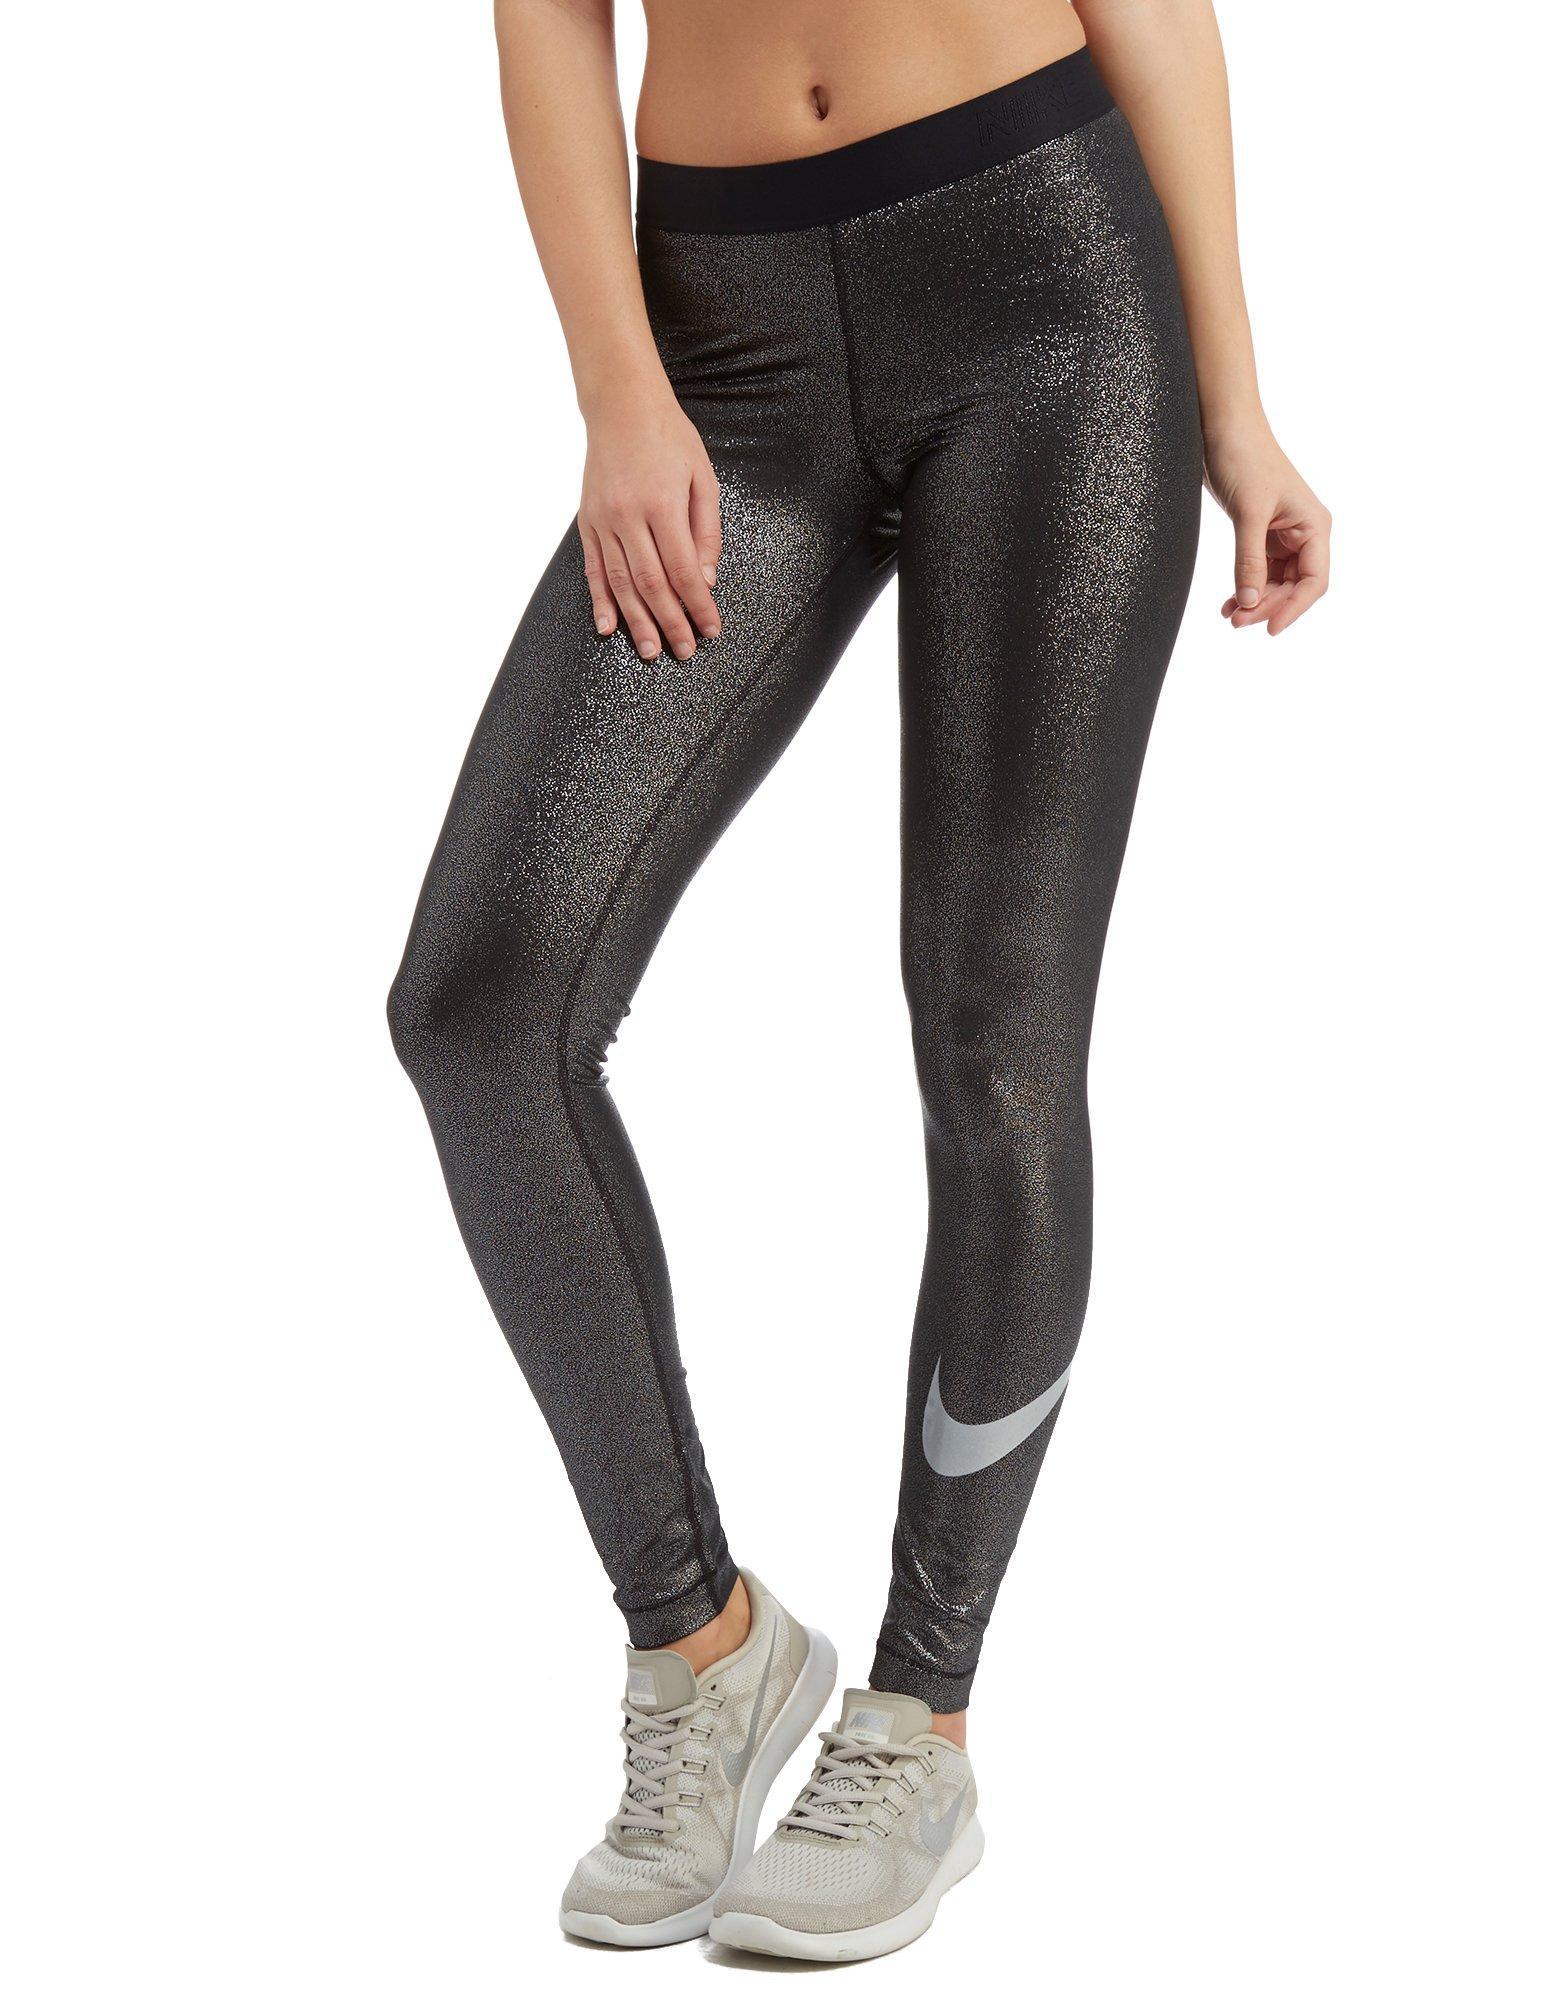 Lyst - Nike Pro Sparkle Training Tights in Black